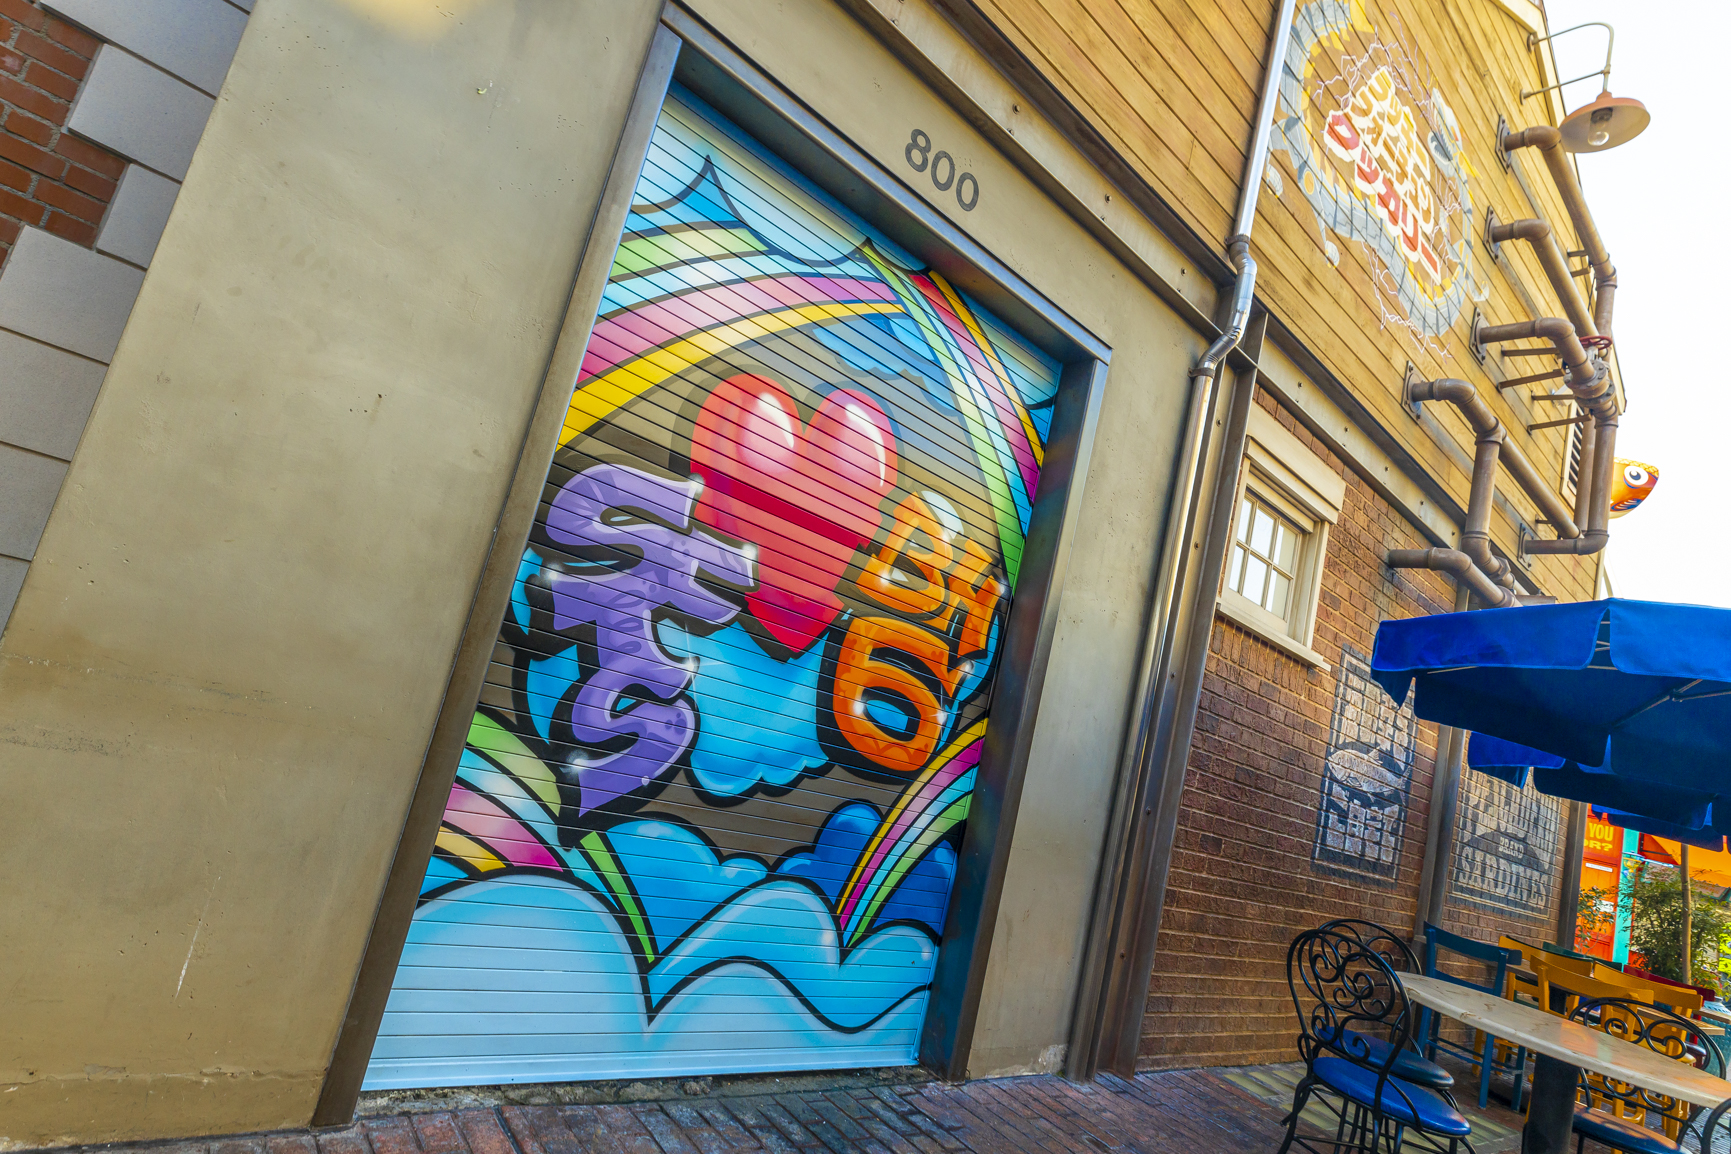 Throughout San Fransokyo Square at Disney California Adventure Park in Anaheim, Calif., guests will discover that the local businesses and eateries are decked out in street art and decor celebrating the Big Hero 6 team after their victory over Yokai. (Christian Thompson/Disneyland Resort)